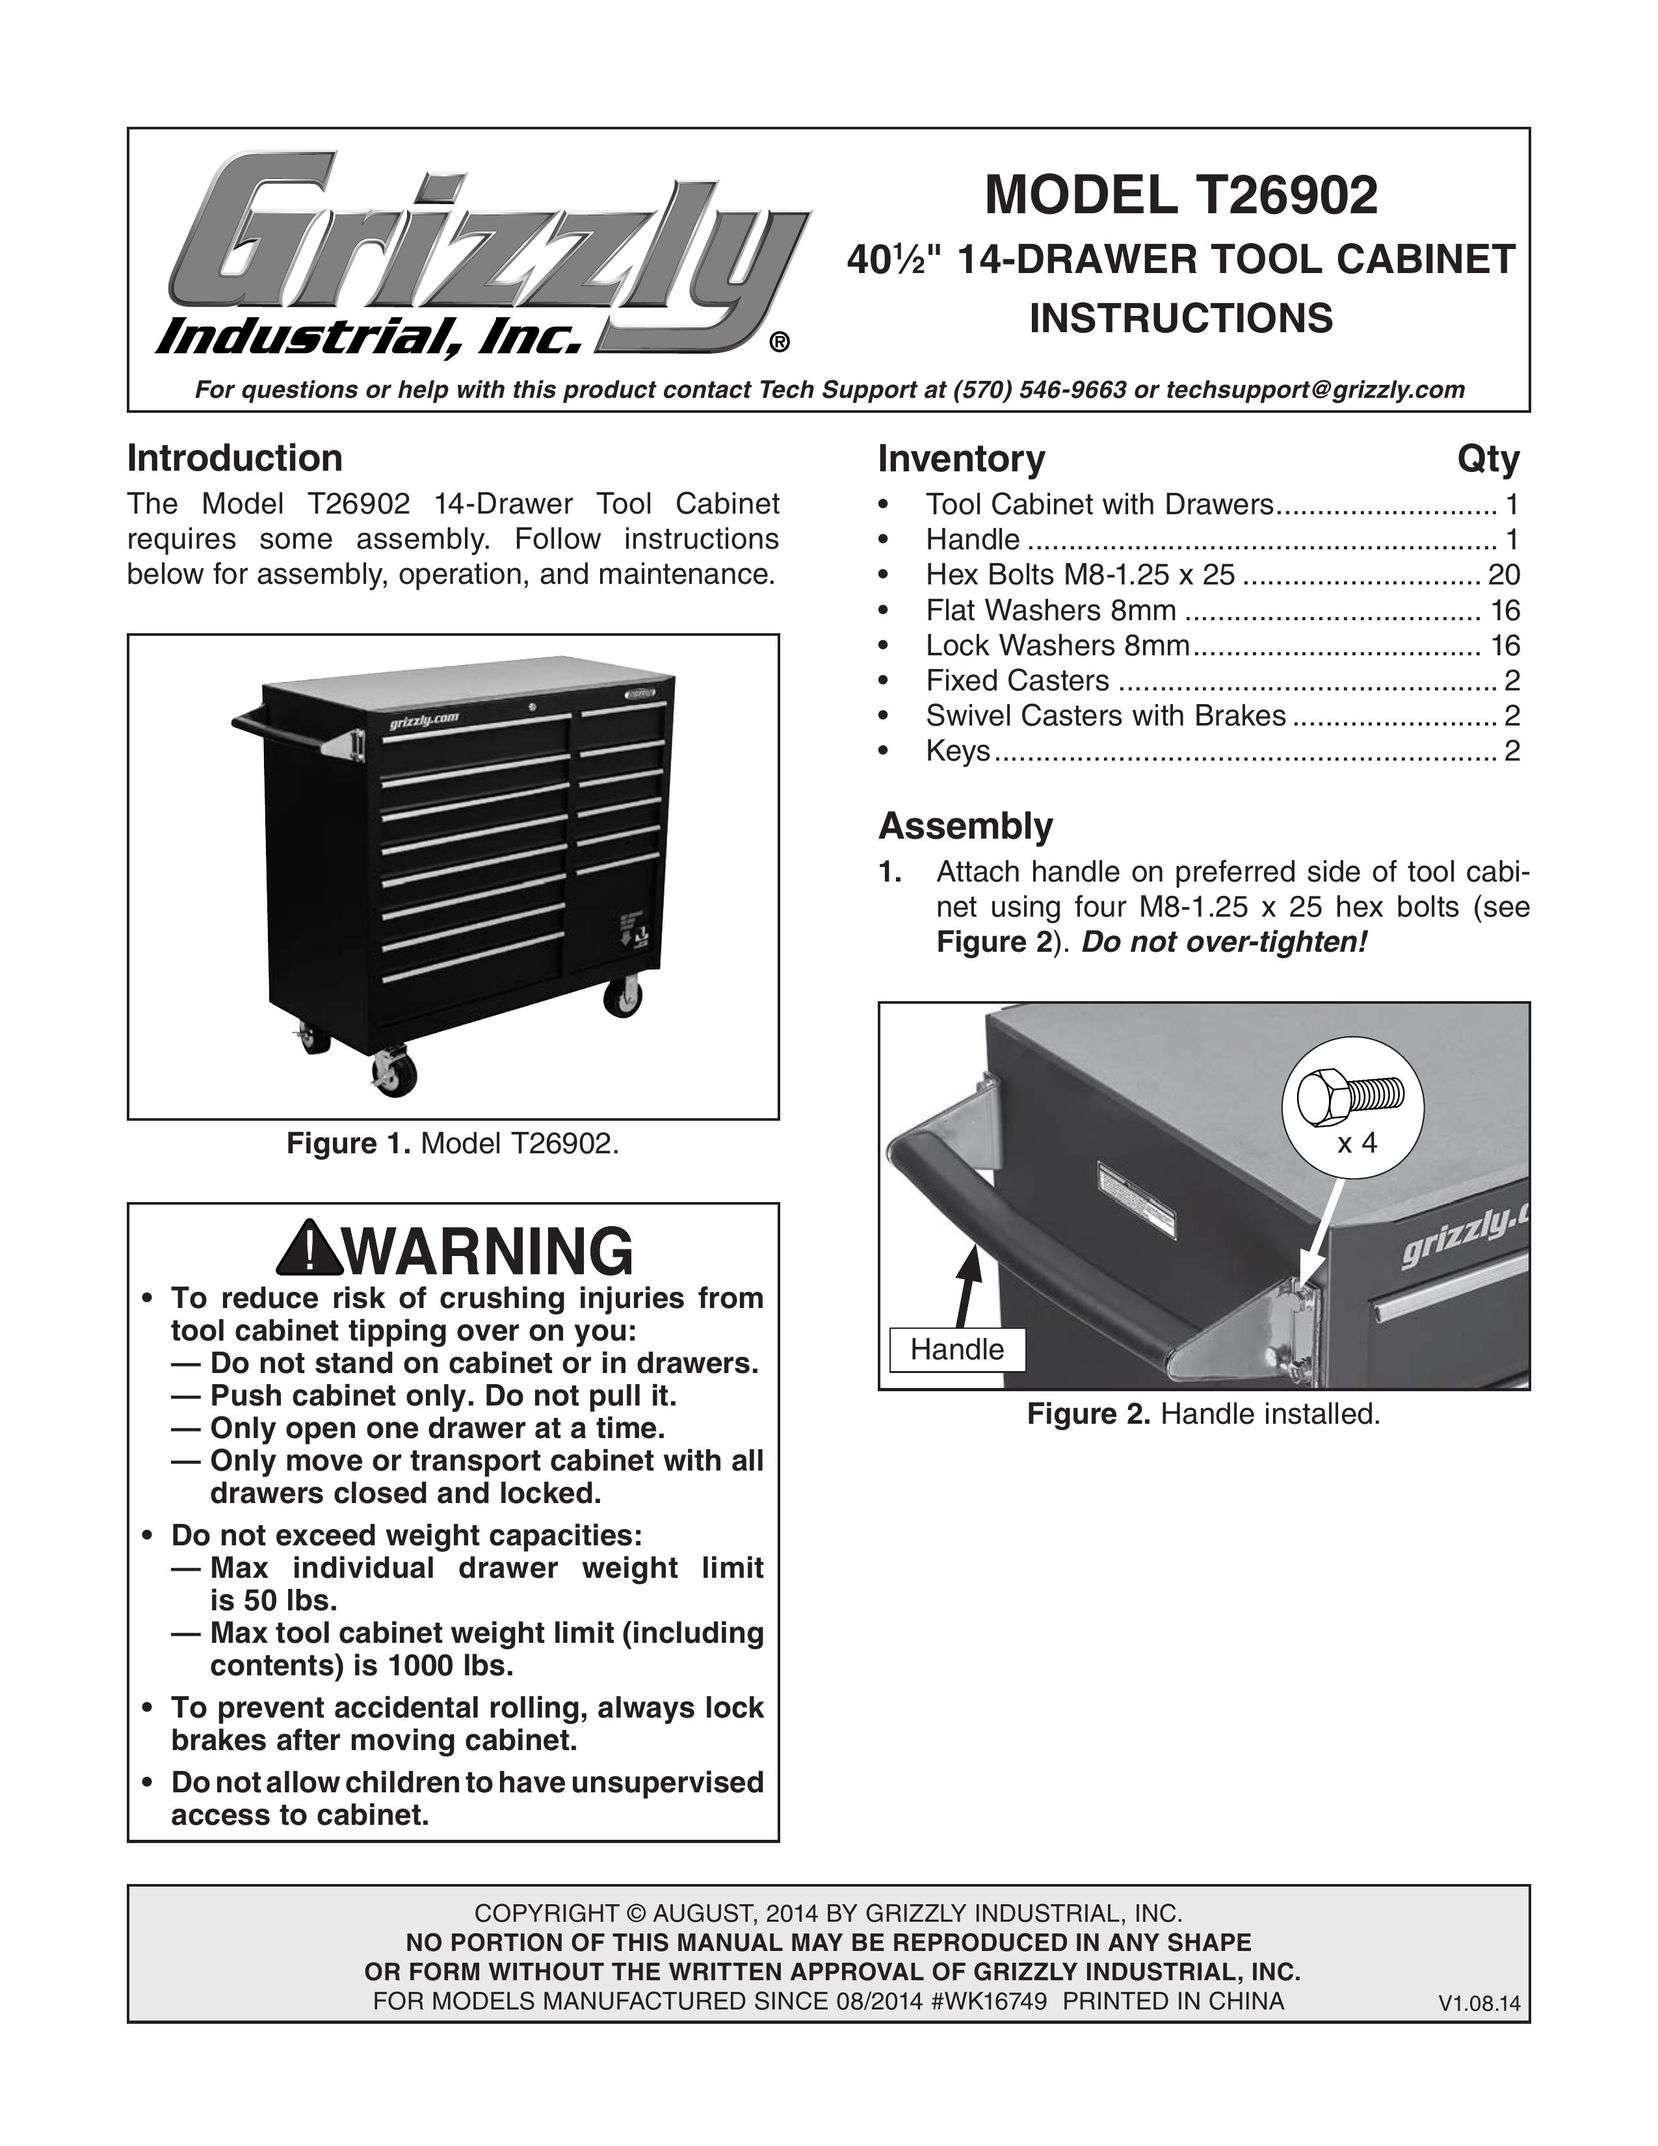 Grizzly T26902 Tool Storage User Manual